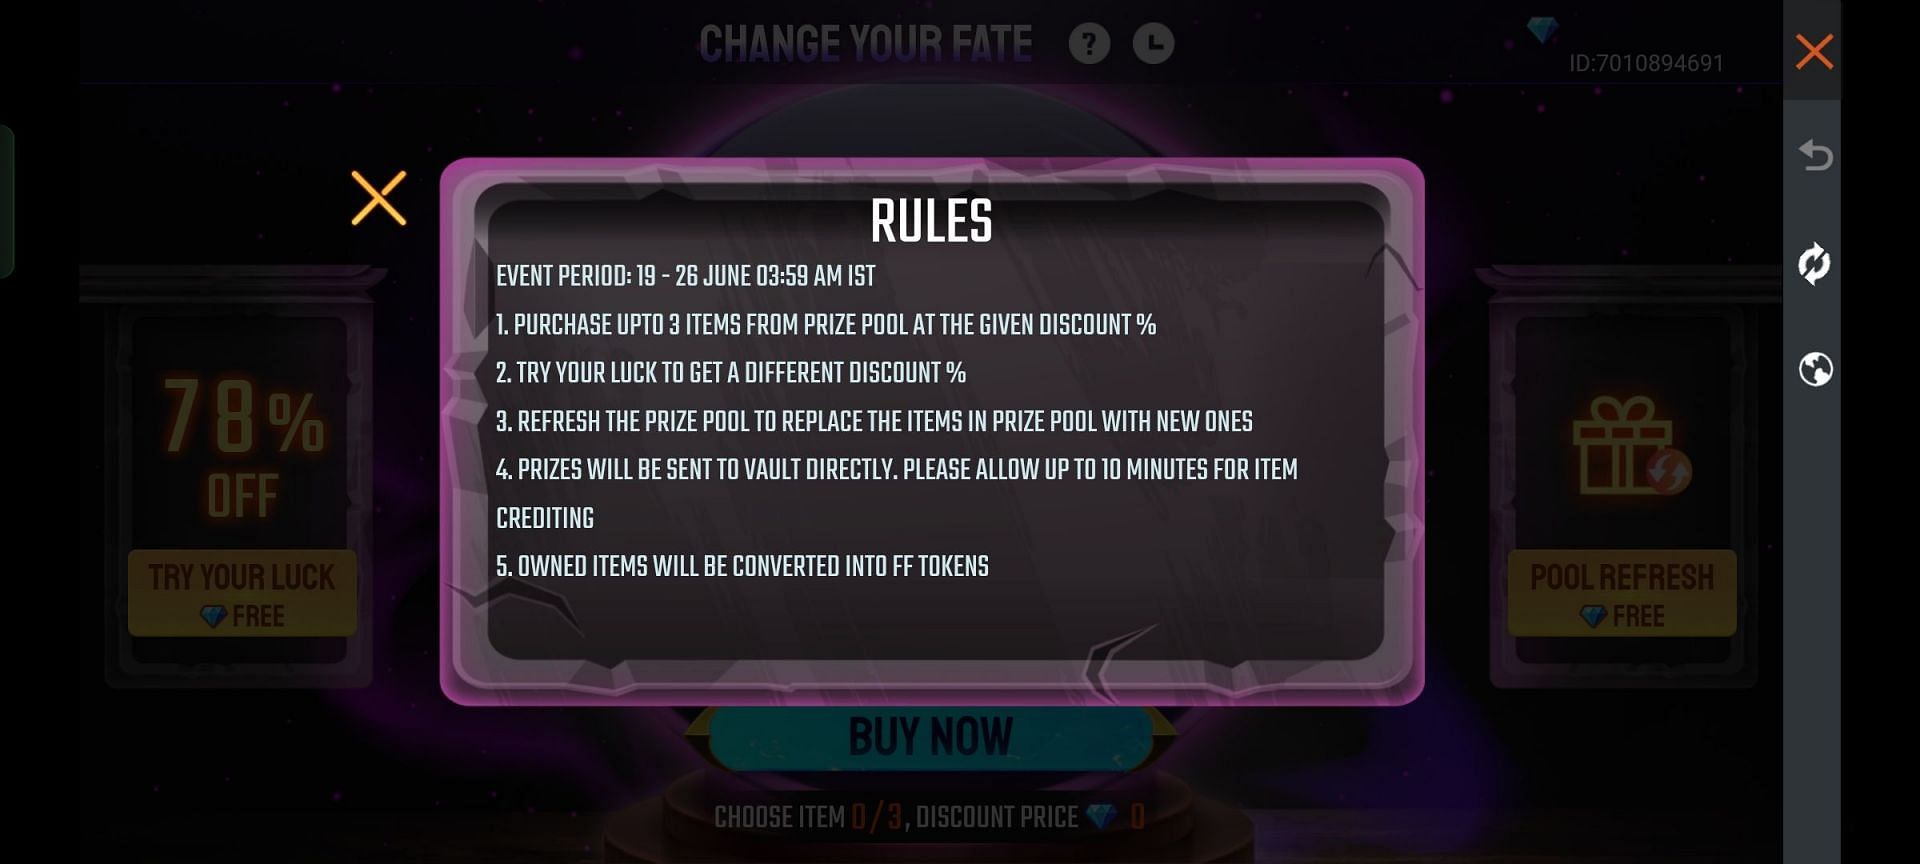 These are the rules of the ongoing Change Your Fate event (Image via Garena)